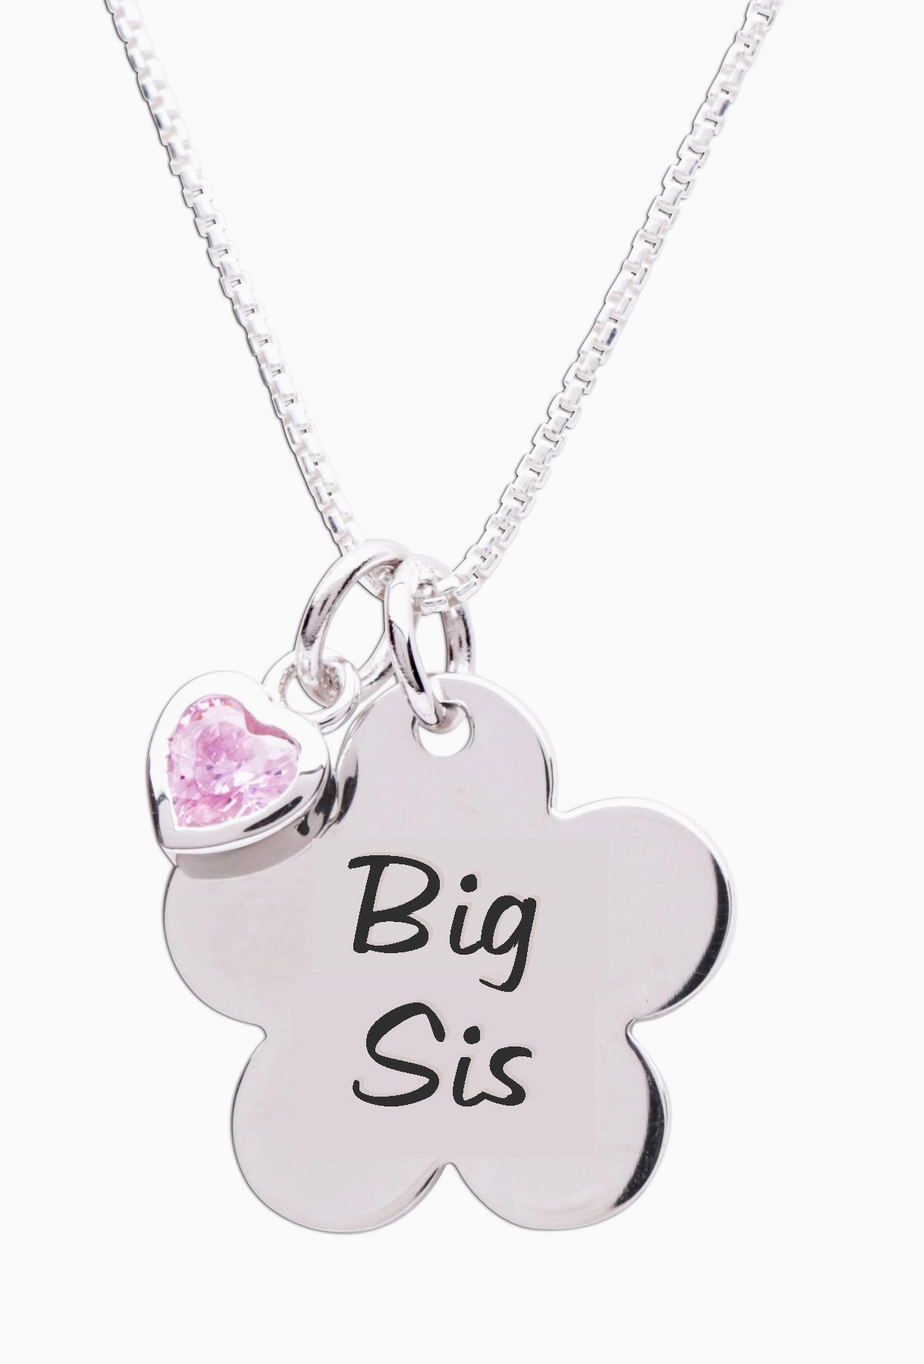 Cherished Moments Sterling Silver Big Sis Daisy Necklace for Girls and Sisters